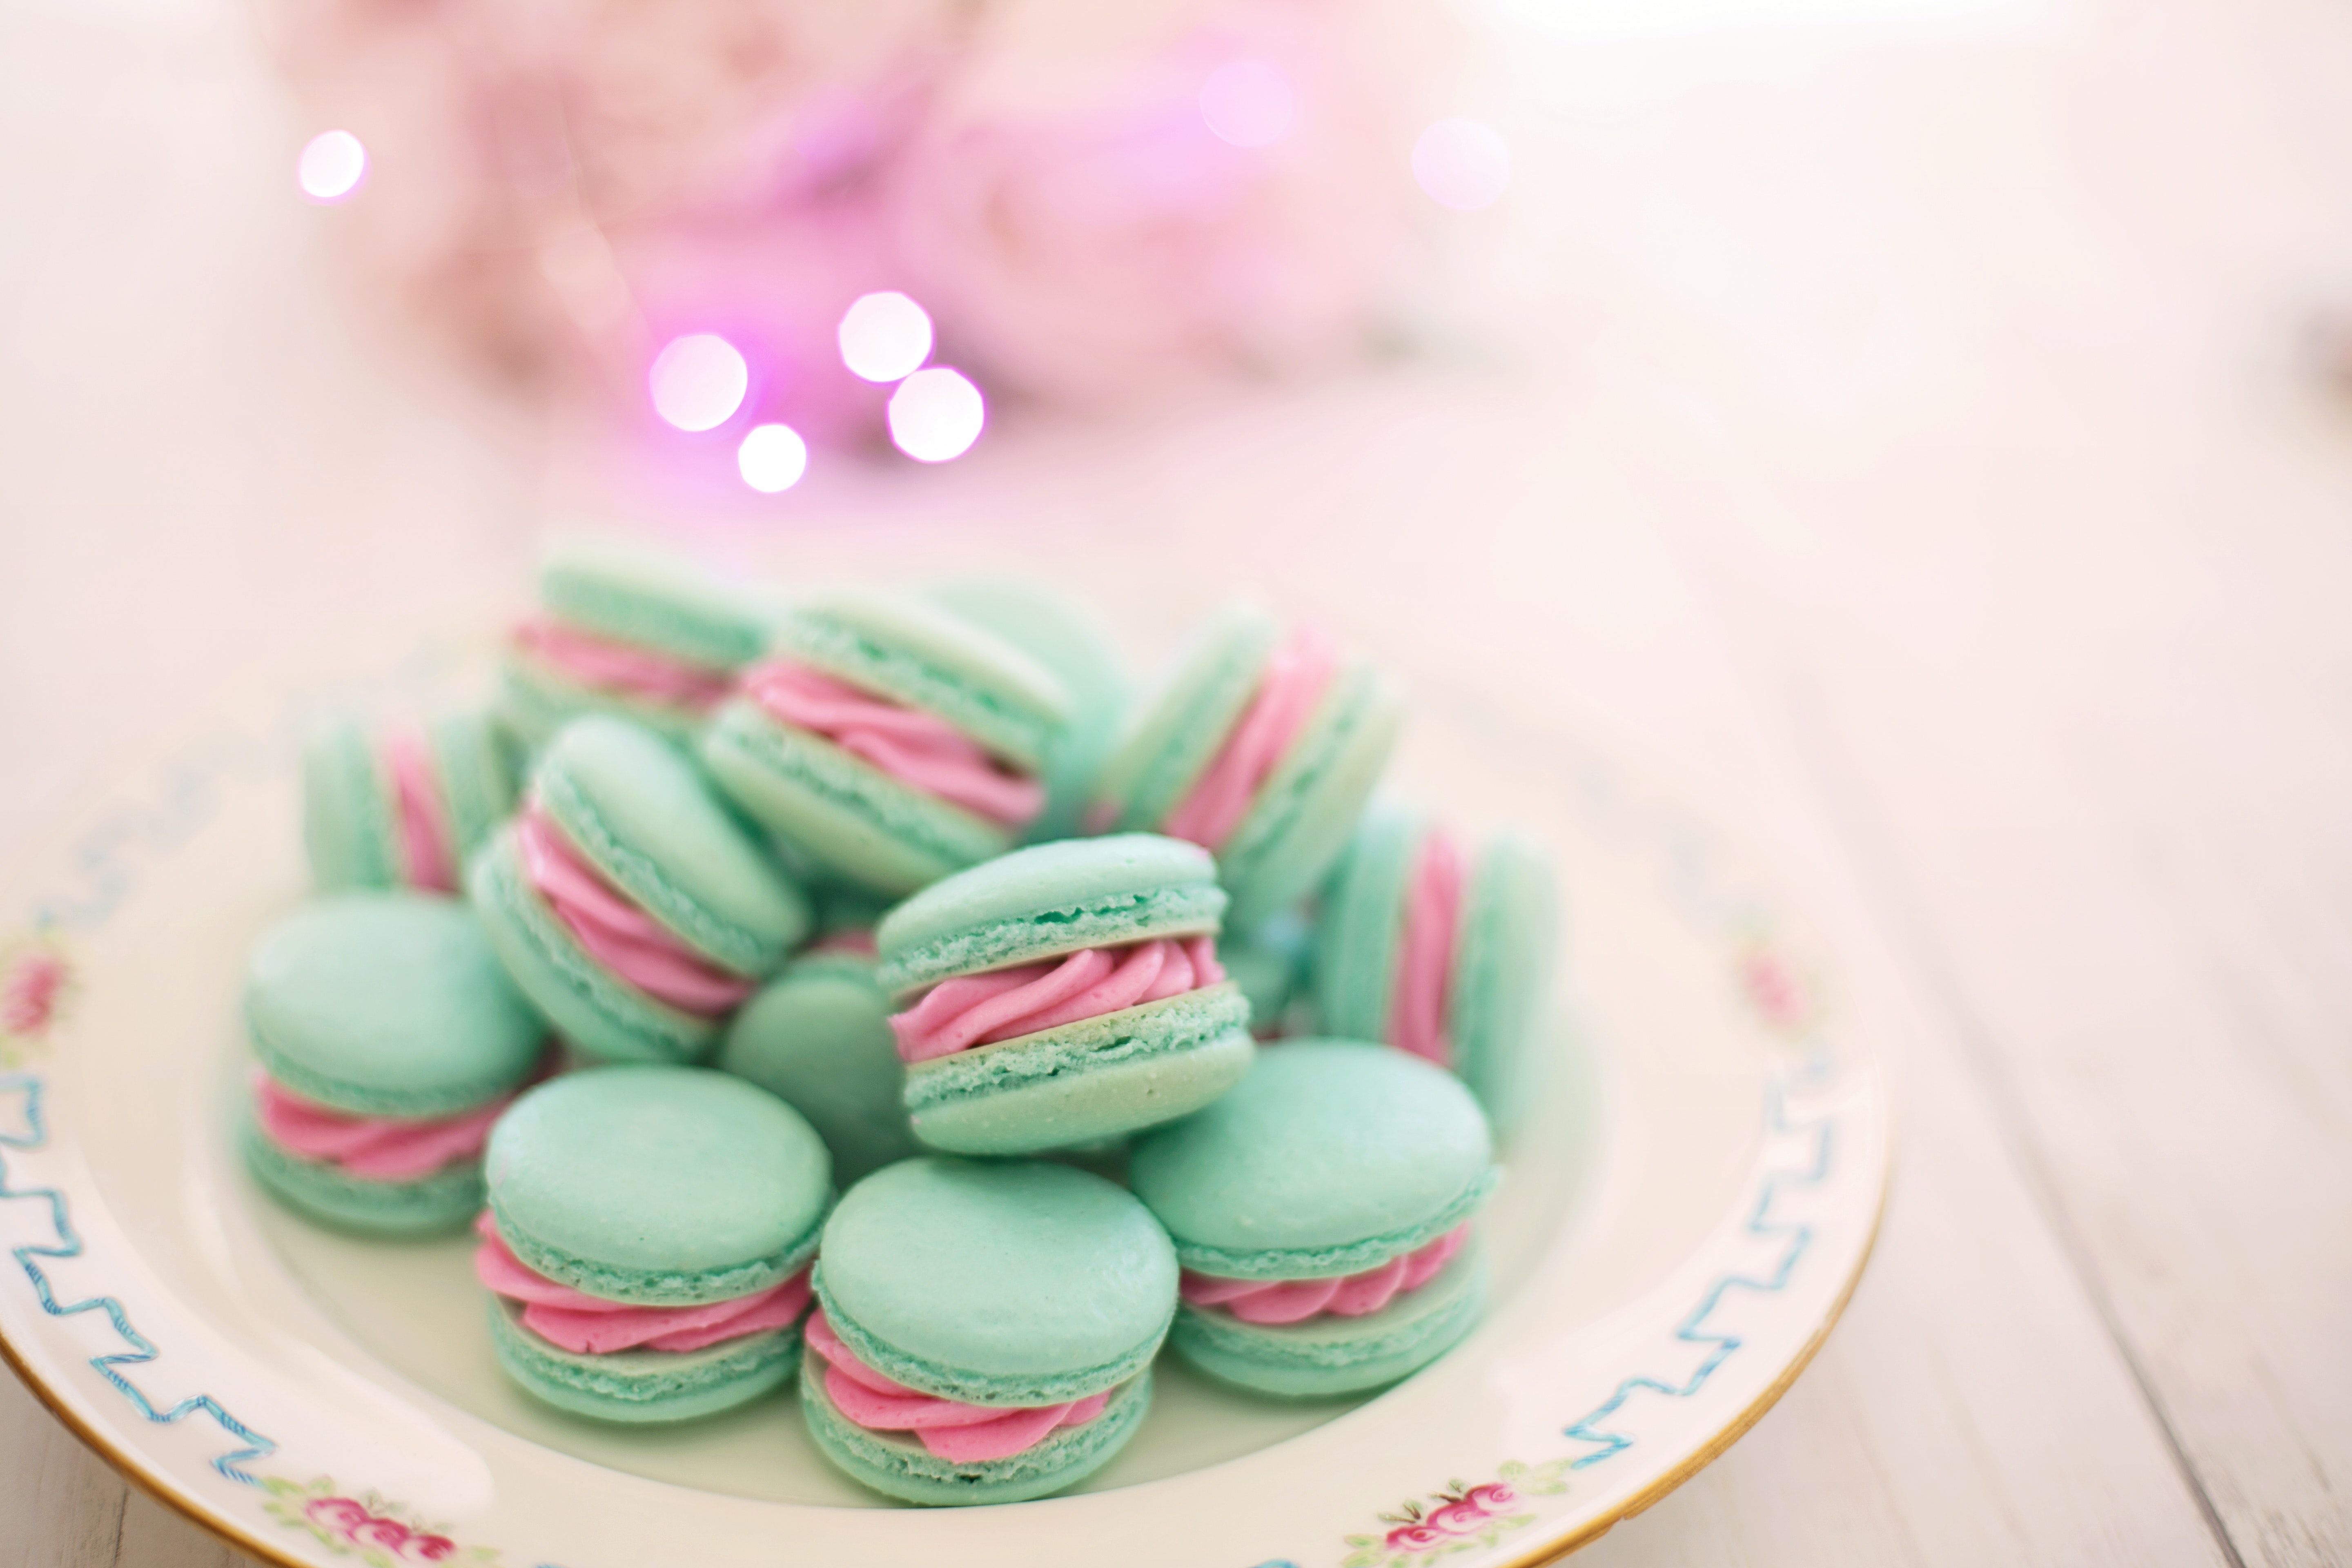 A plate of blue and pink macarons - Macarons